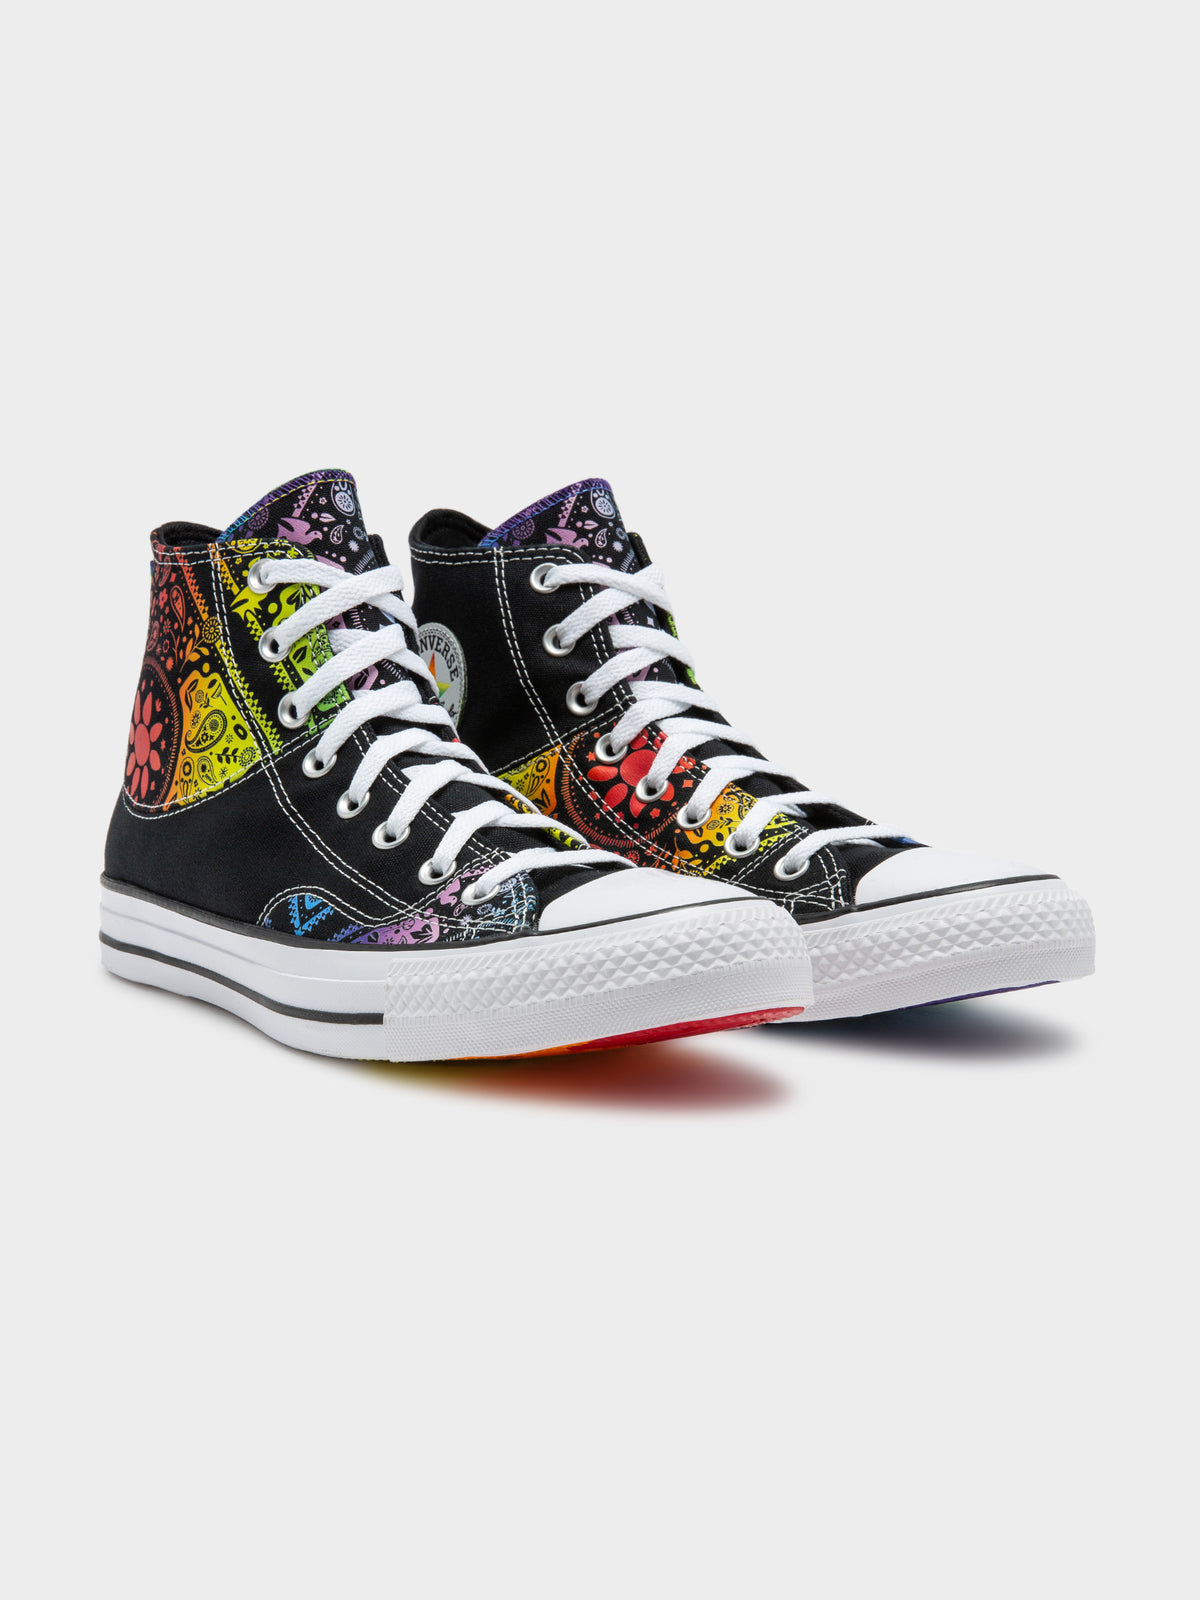 Unisex Chuck Taylor All Star Pride High-Top Sneakers in Black &amp; Rainbow Paisley